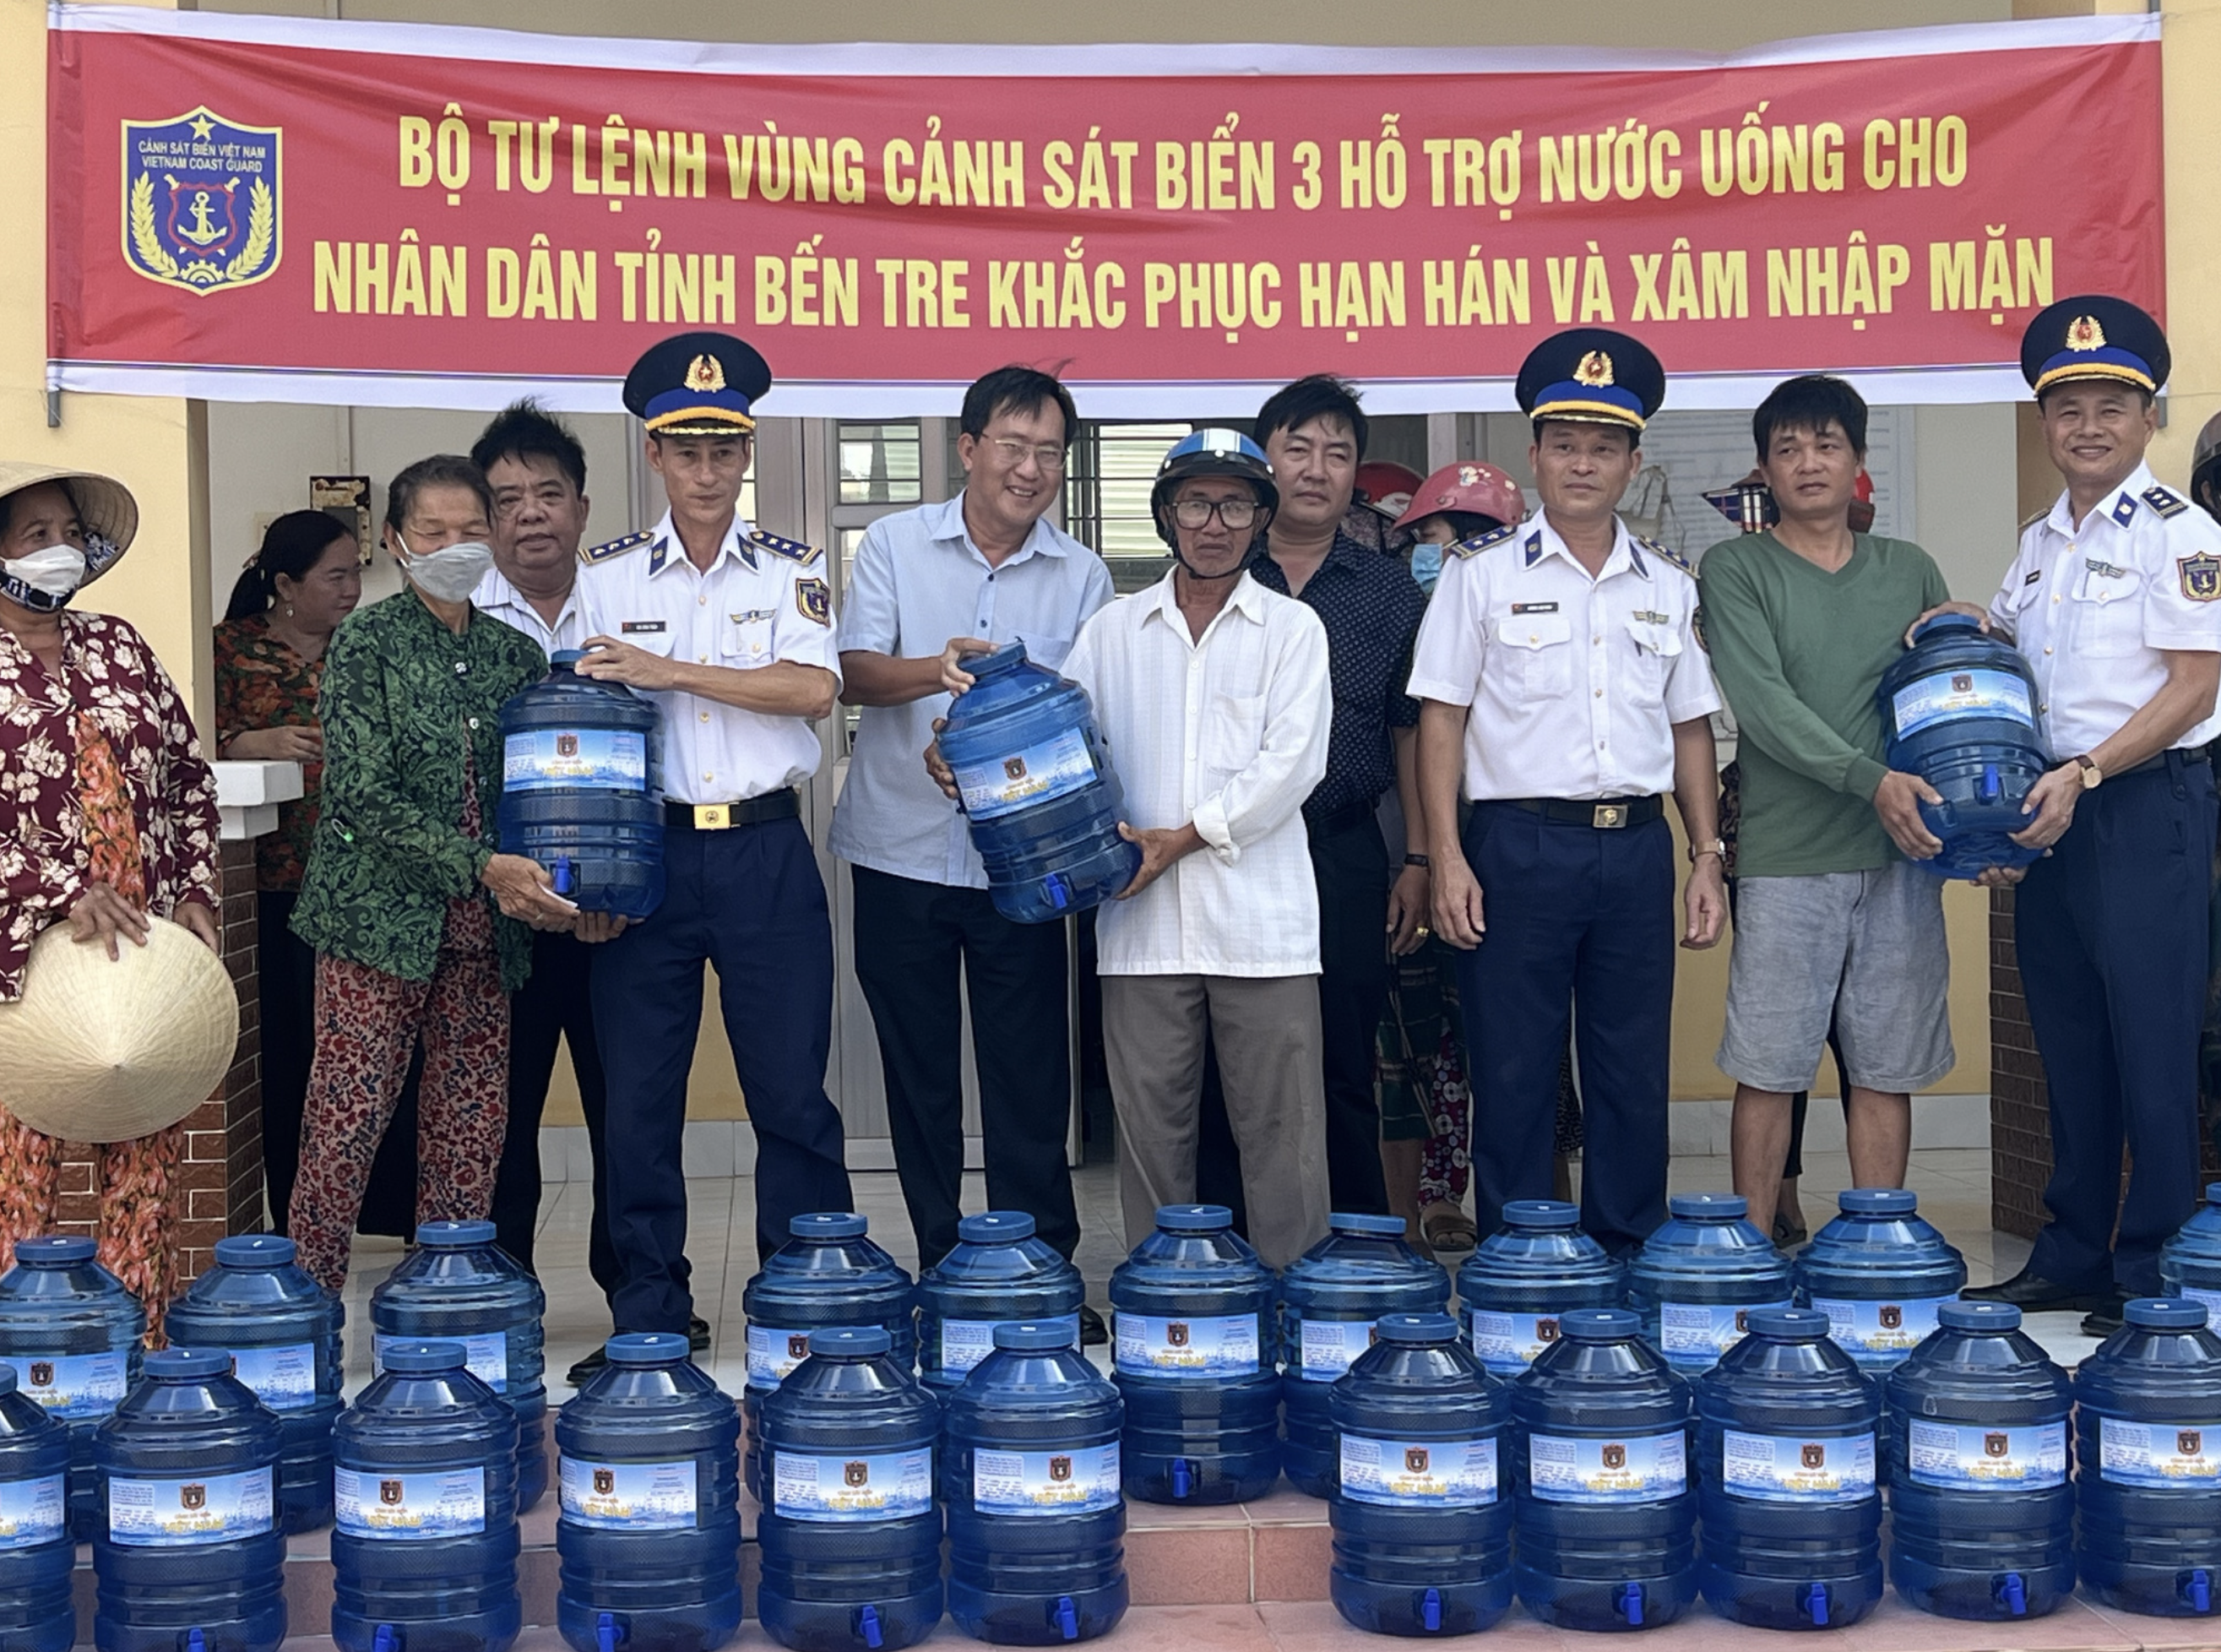 Coast guard forces donate 1,000 bottles of water to water-stressed areas in Vietnam’s Ben Tre